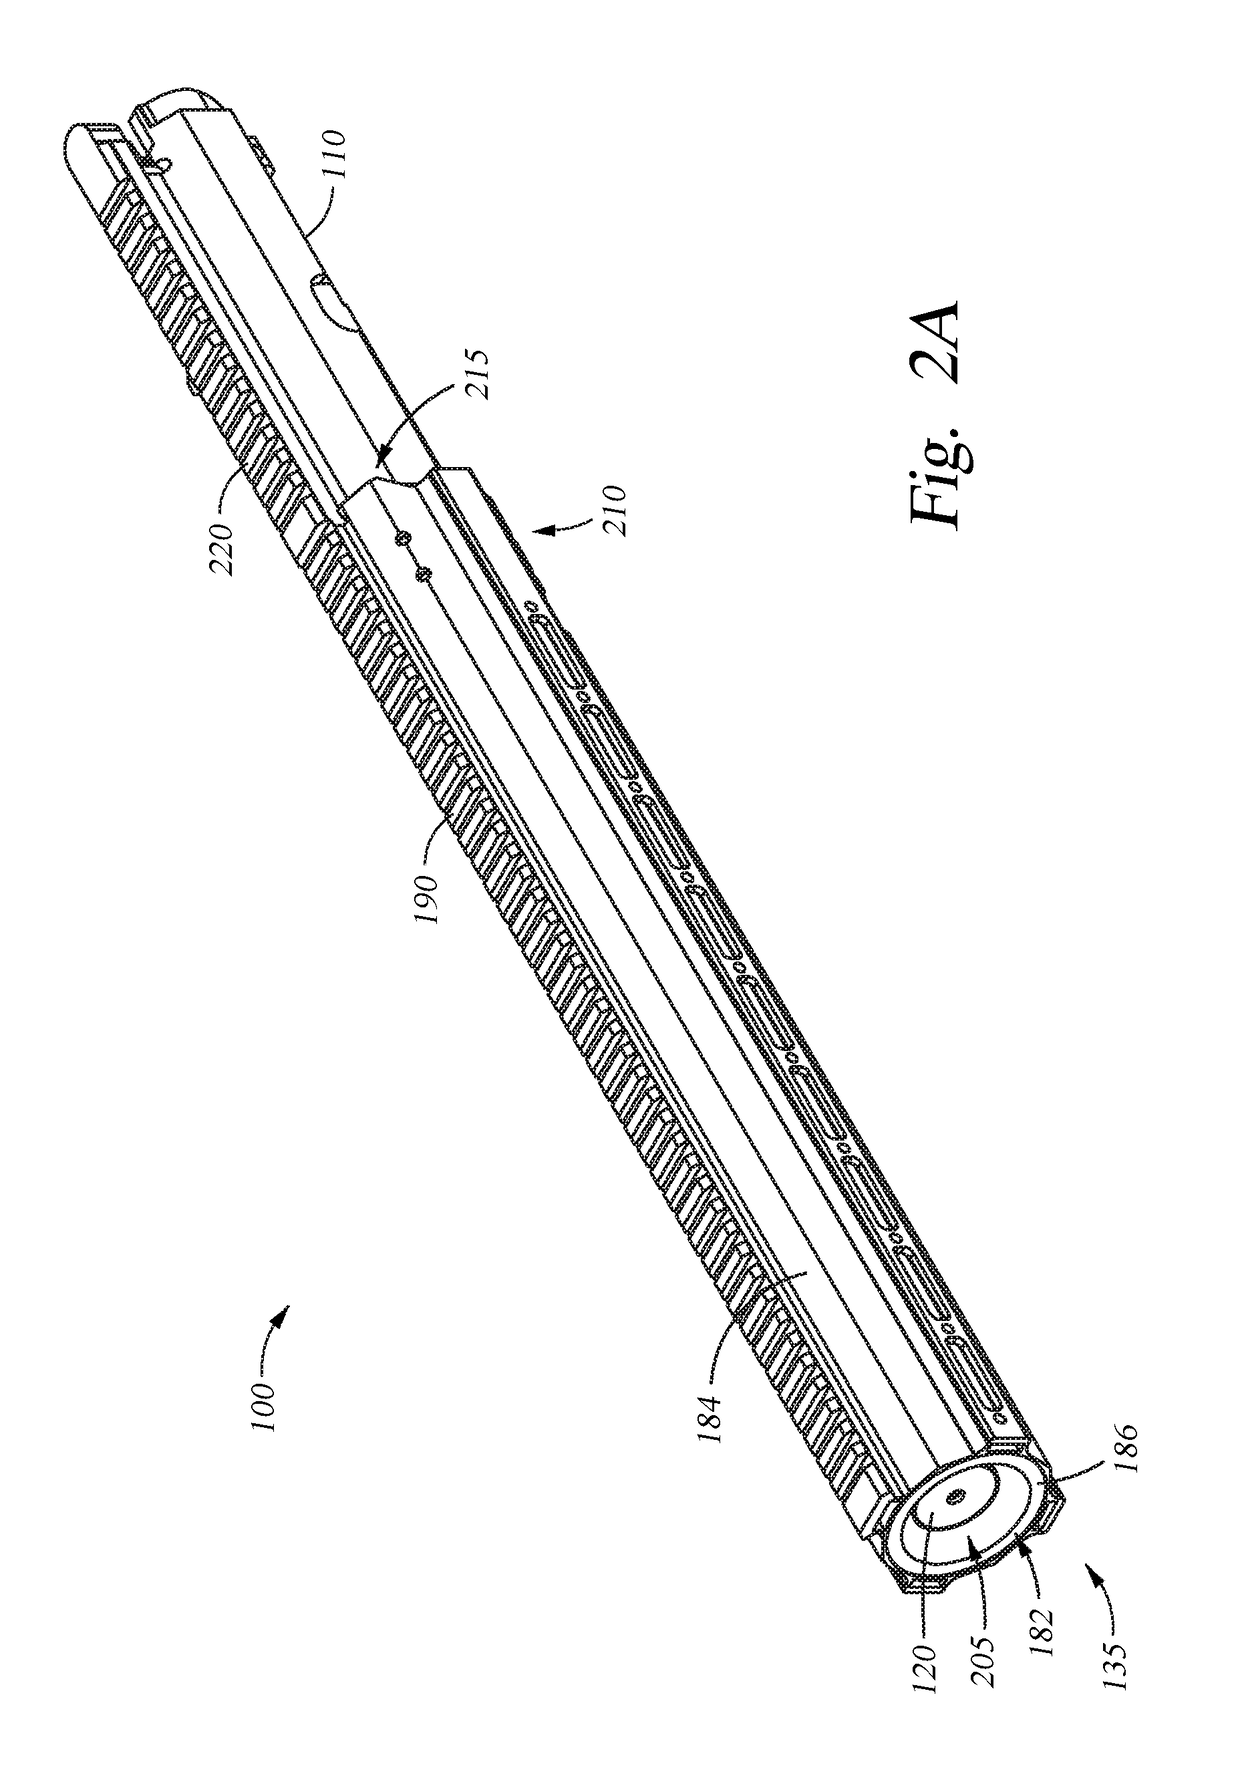 Handguard and barrel assembly with sound suppressor for a firearm